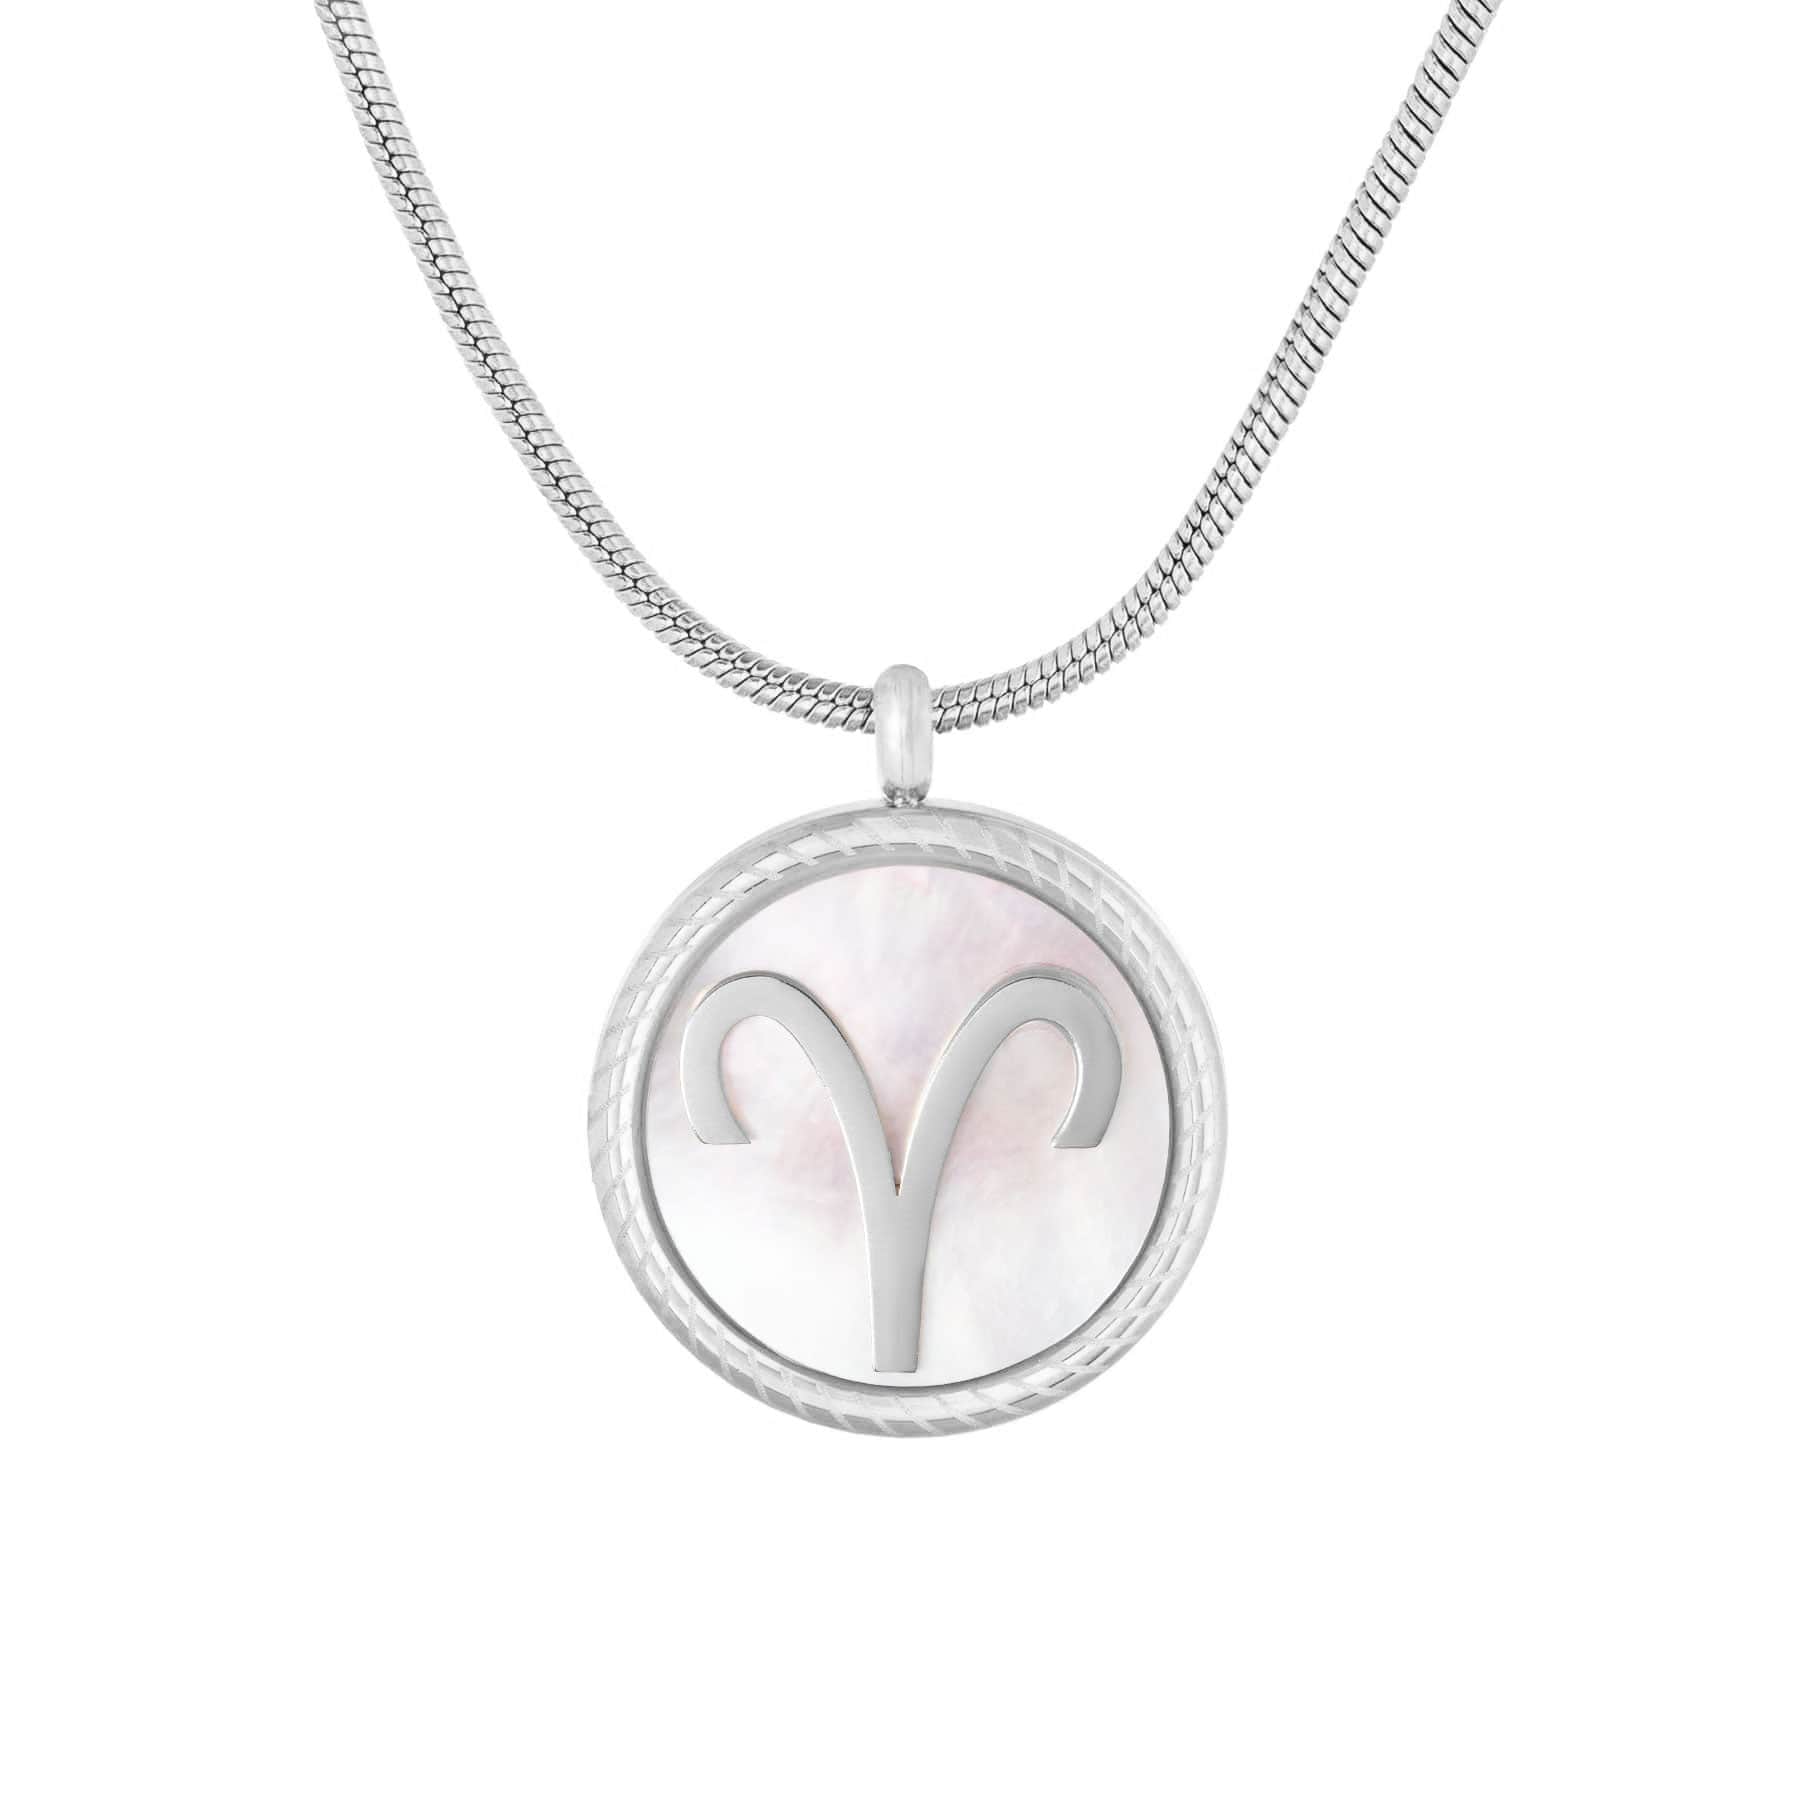 BohoMoon Stainless Steel Frost Zodiac Necklace